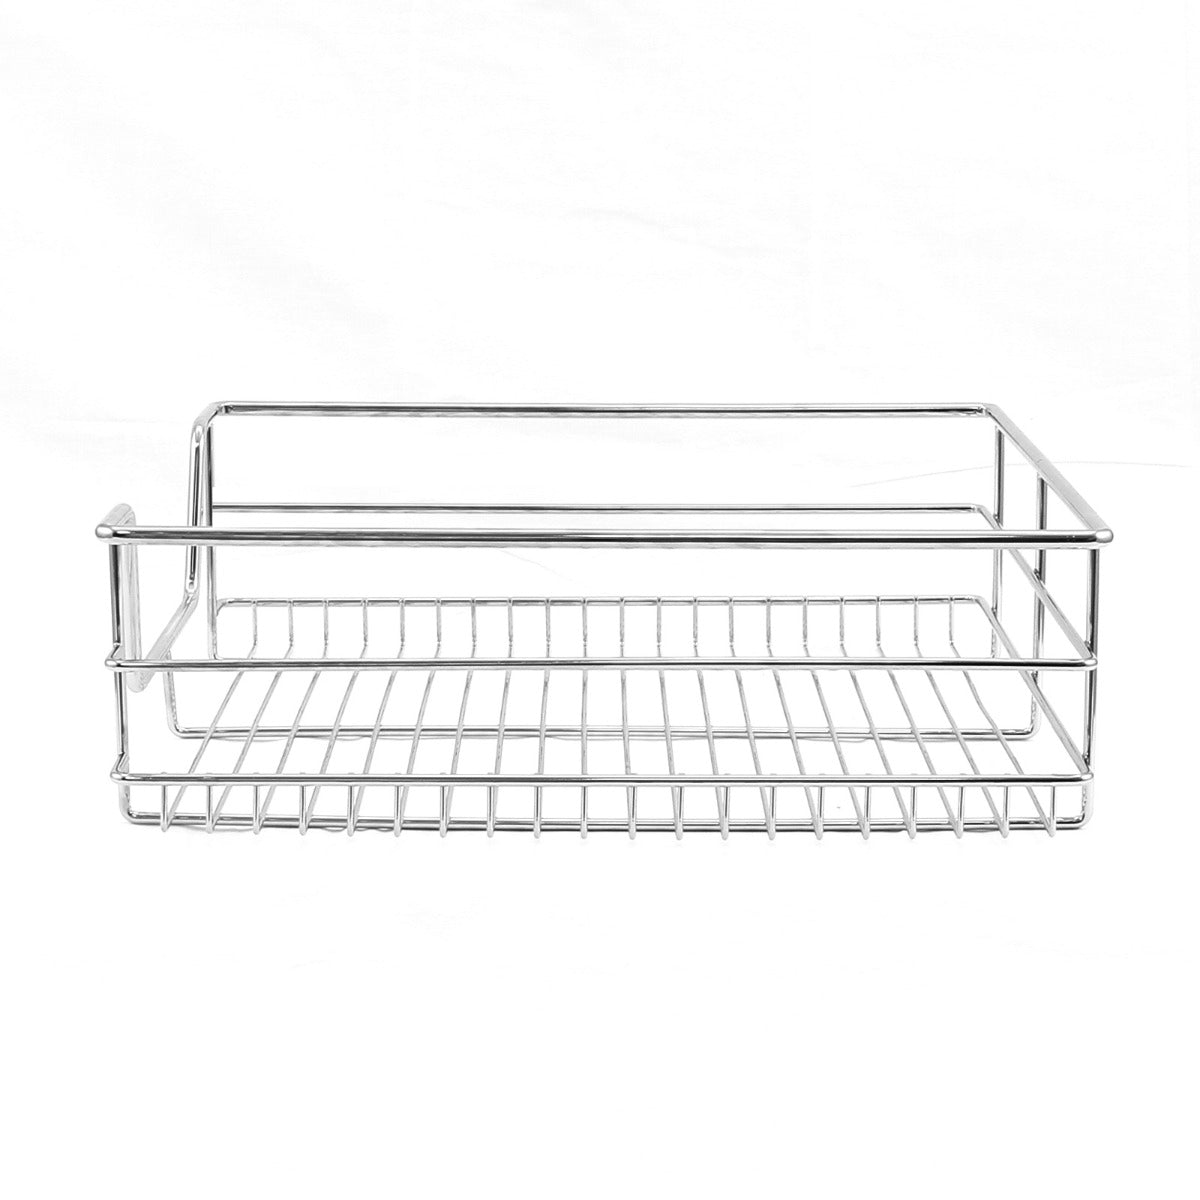 2 x KuKoo Kitchen Pull Out Storage Baskets – 600mm Wide Cabinet